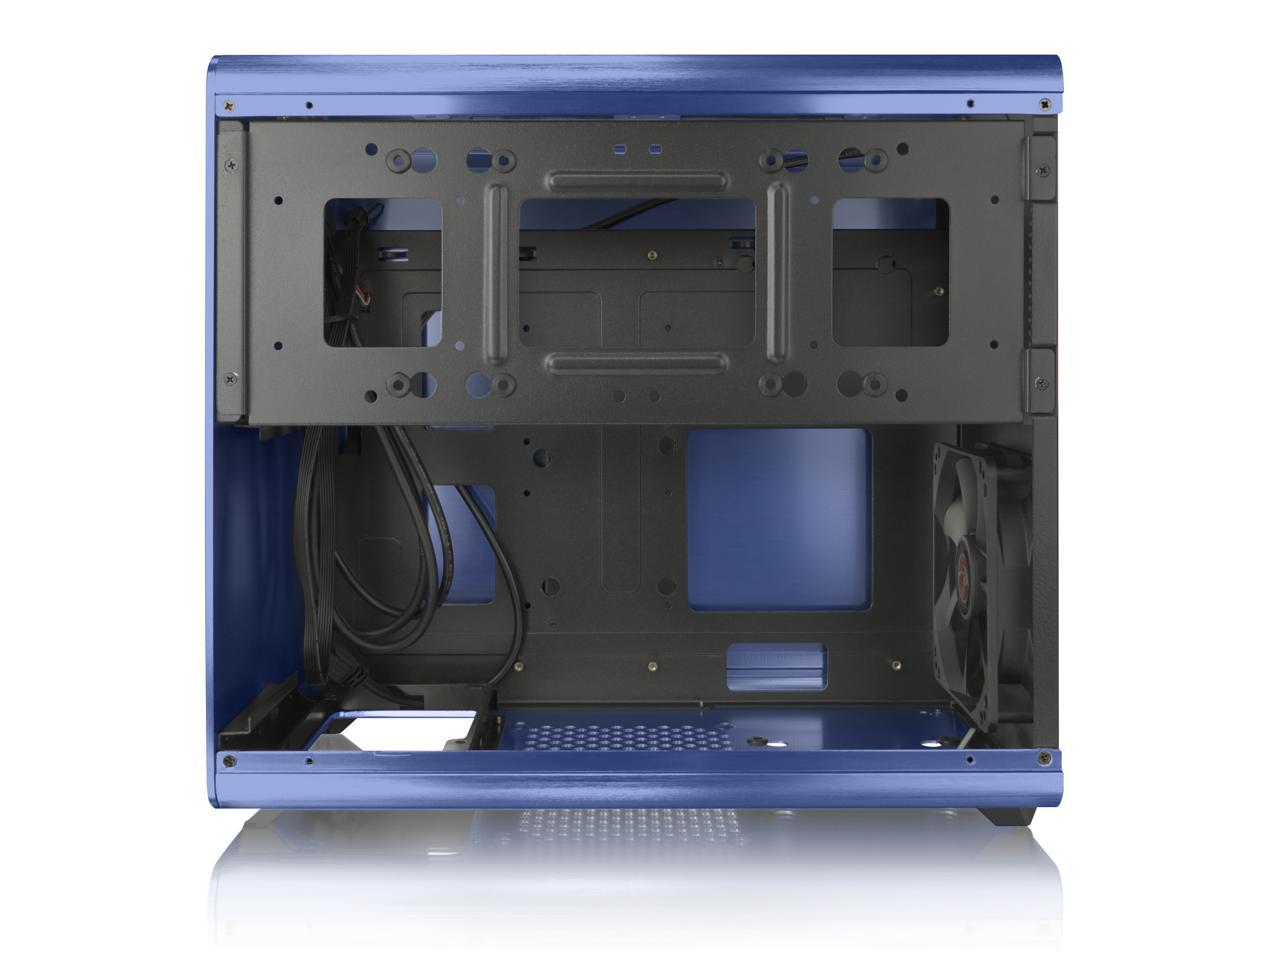 RAIJINTEK STYX BLUE, Alu Micro-ATX Case, Compatible With Regular ATX Power Supply, Max. 280mm VGA Card, 180mm CPU Cooler, Max. 240mm Radiator Cooling On Top With A Drive Bay For Slim DVD On Side